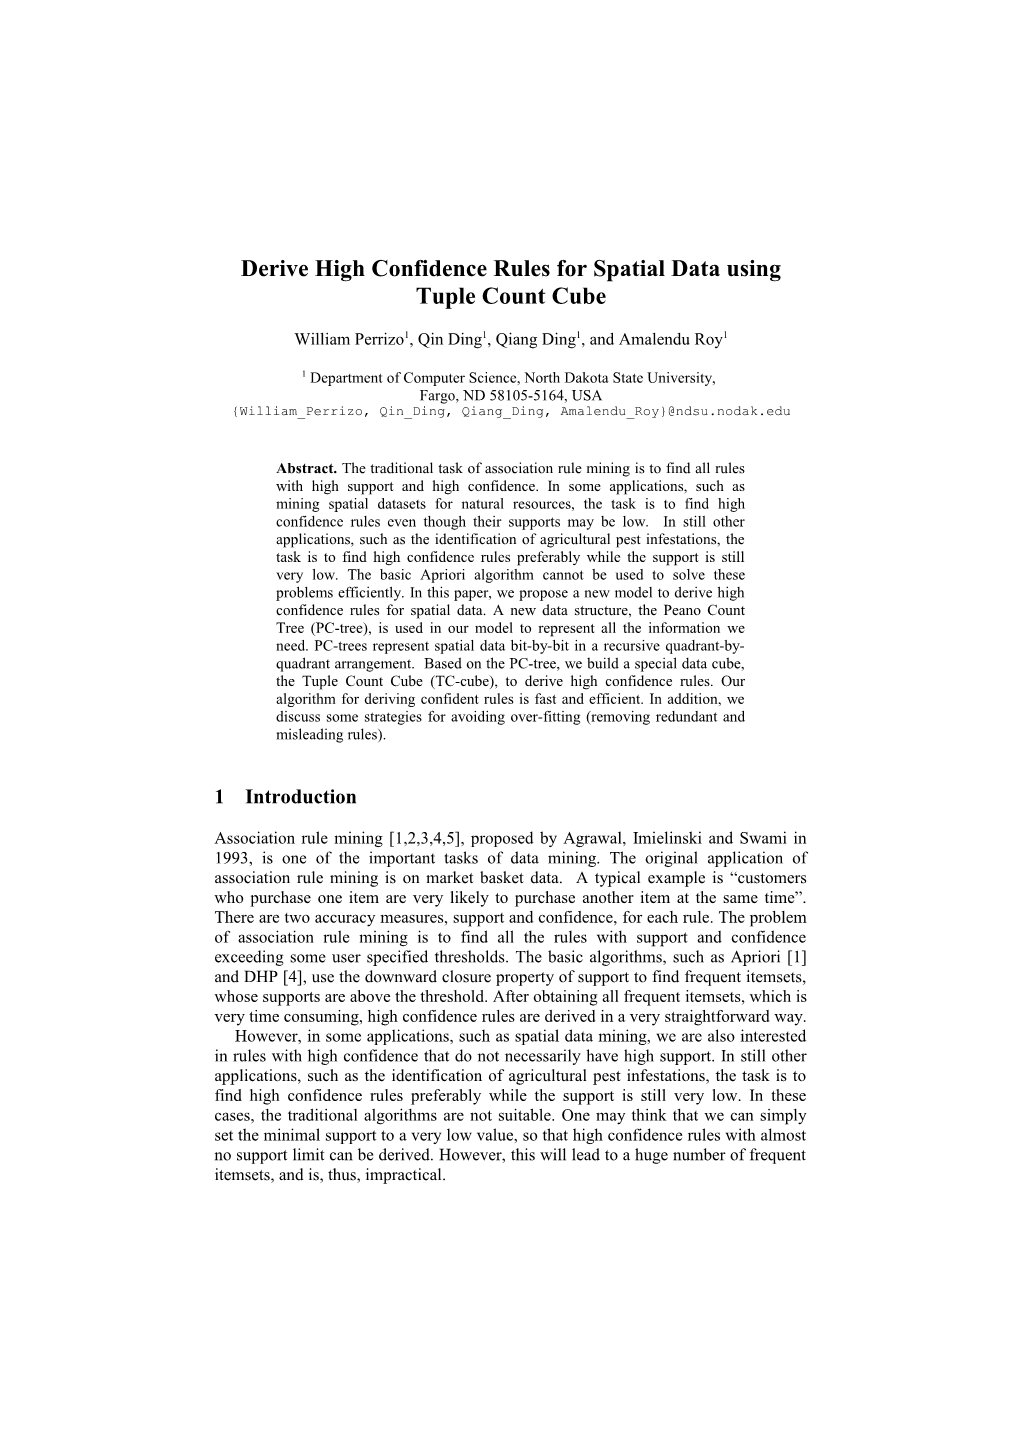 Derive High Confidence Rules for Spatial Data Using Count Cube